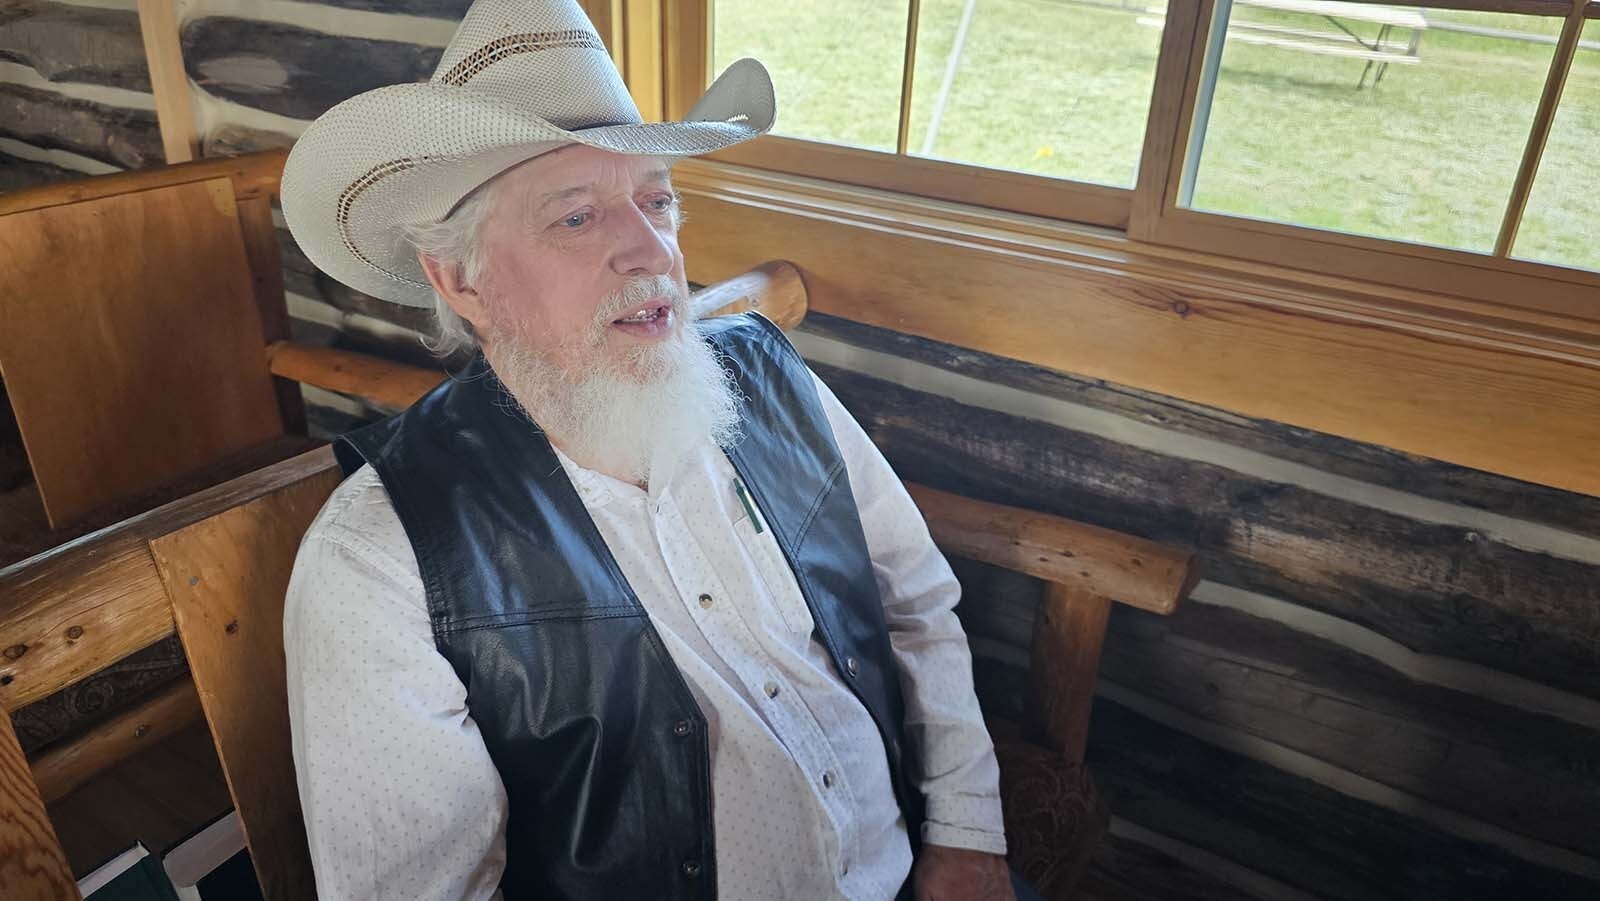 Pastor Kirby Kuldak got the idea for Buckboard Sunday while on a camping trip in the mountains. The idea was to invite all the ranchers in the area to bring a horse or a buckboard to church for Father's Day on Sunday. The ministry highlights a simple but wonderful thing in life — families and fathers.